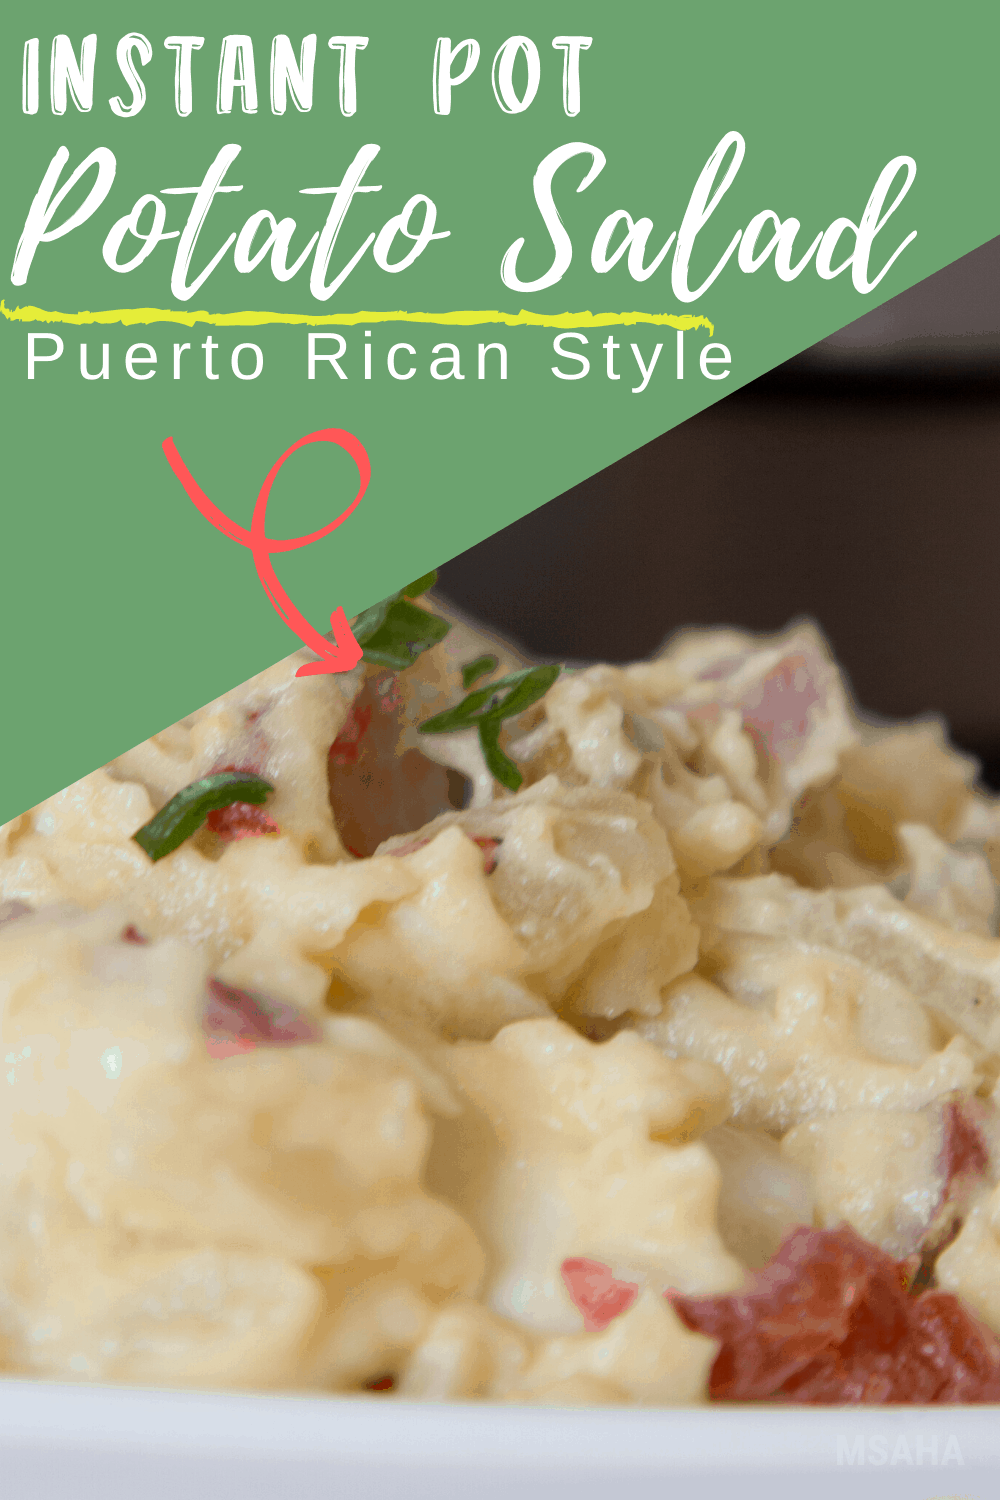 Easy and quick to make, this Puerto Rican potato salad is what you are looking for. Flavorful and so creamy and made using an Instant Pot. #puertoricanfood #recipe #instantpot #potatosalad via @mystayathome